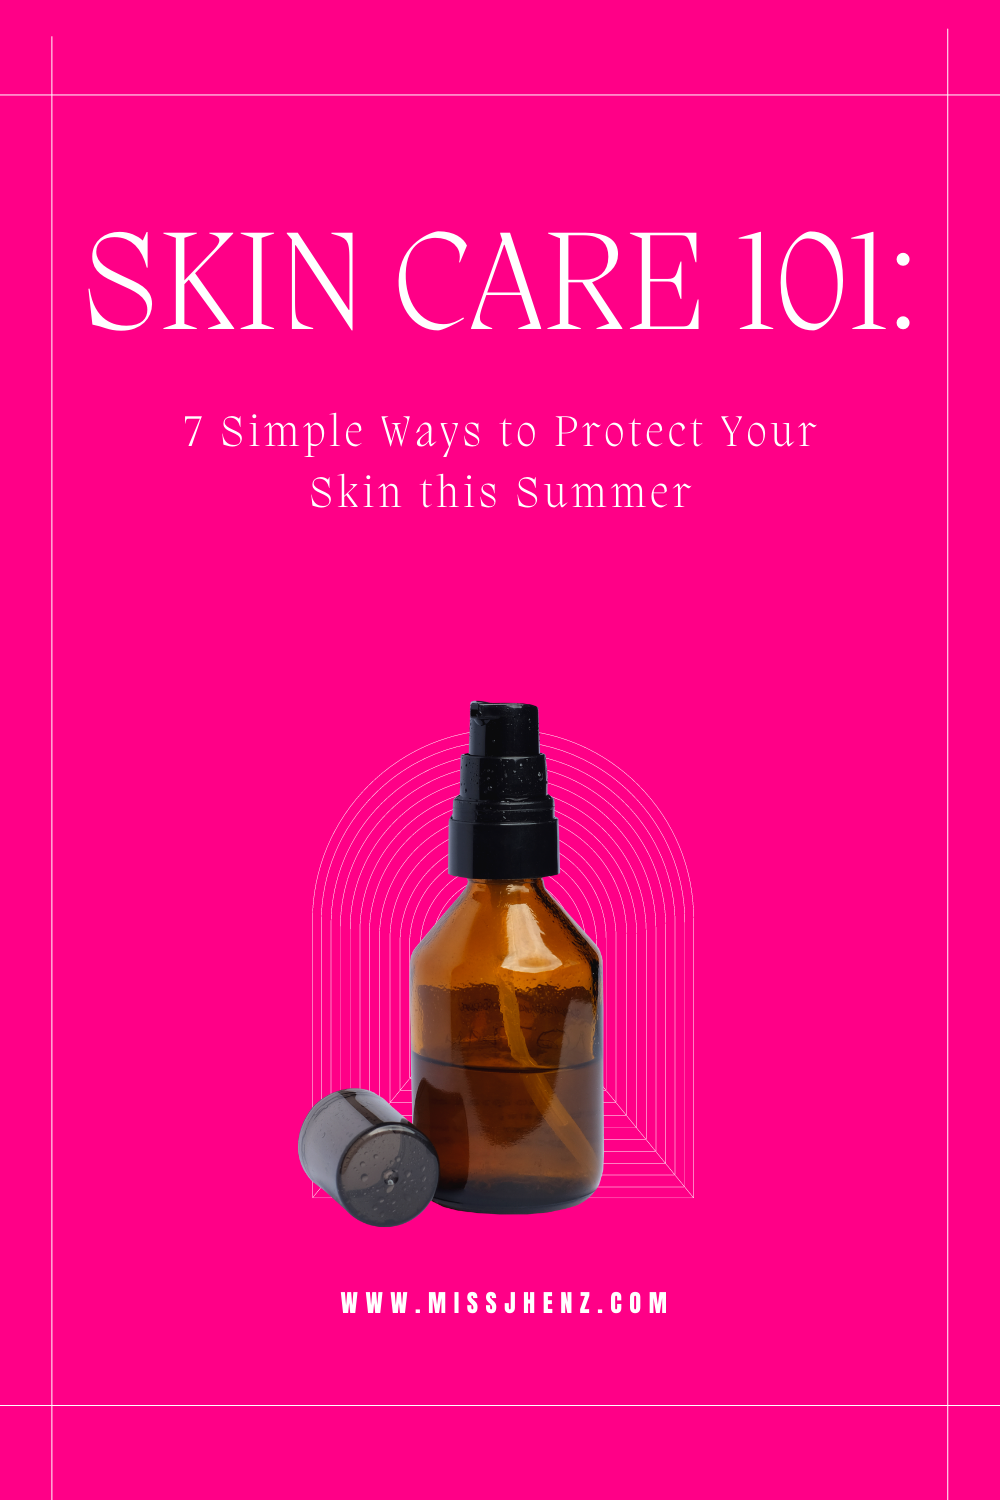 Skin Care 101: 7 Simple Ways to Protect Your Skin this Summer